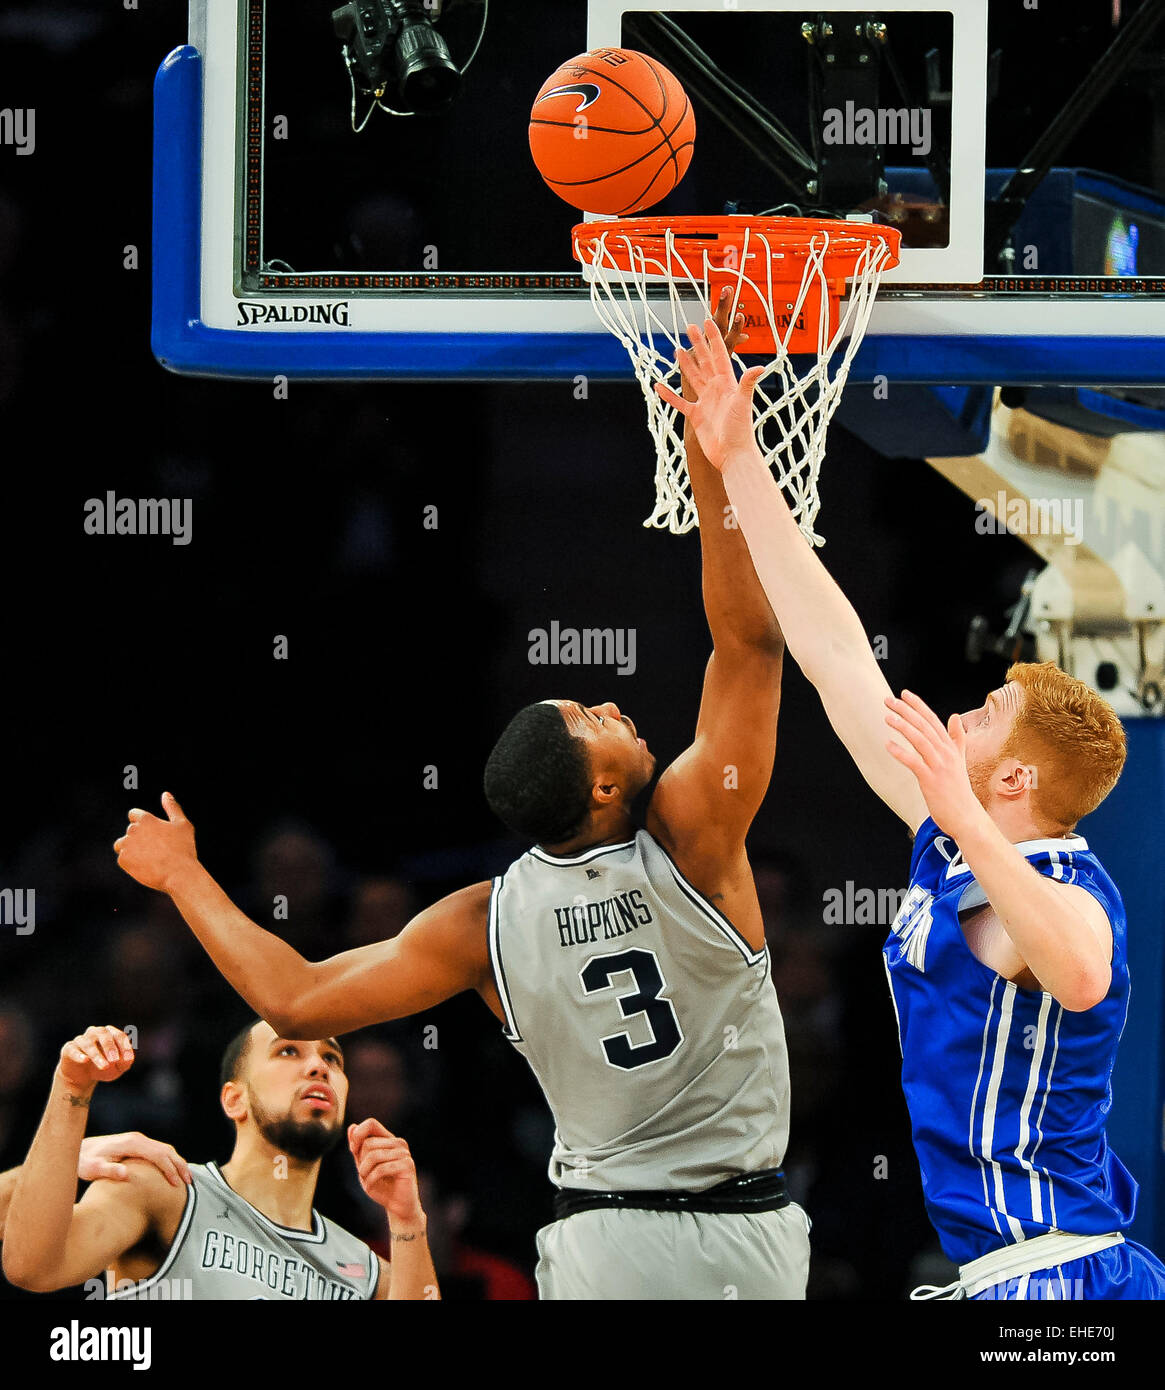 New York, NY, USA. 12th Mar, 2015. March 12, 2015: Georgetown senior forward Mikael Hopkins (3) and Creighton junior center Geoffrey Groselle (41) go up for a rebound during the matchup between the Creighton Bluejays and the Georgetown Hoyas in the Big East Tournament at Madison Square Garden in New York, New York. Scott Serio/CSM/Alamy Live News Stock Photo